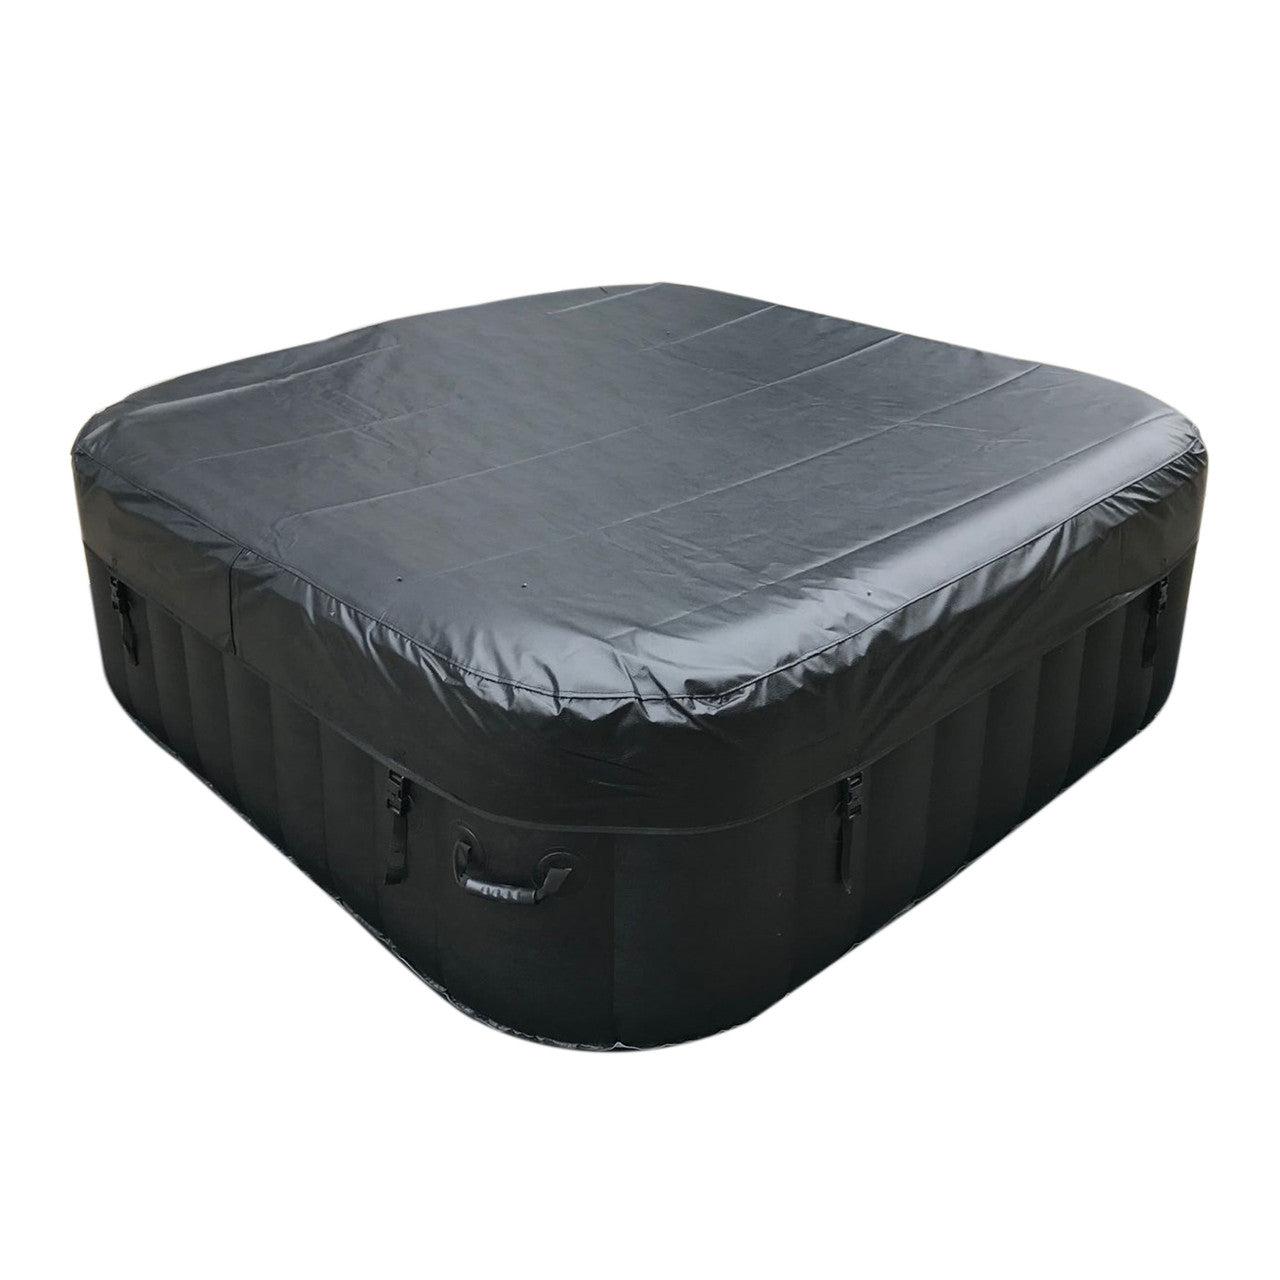 ALEKO 6 Person Black and White 265 Gallon Square Inflatable Jetted Hot Tub with Cover - Purely Relaxation